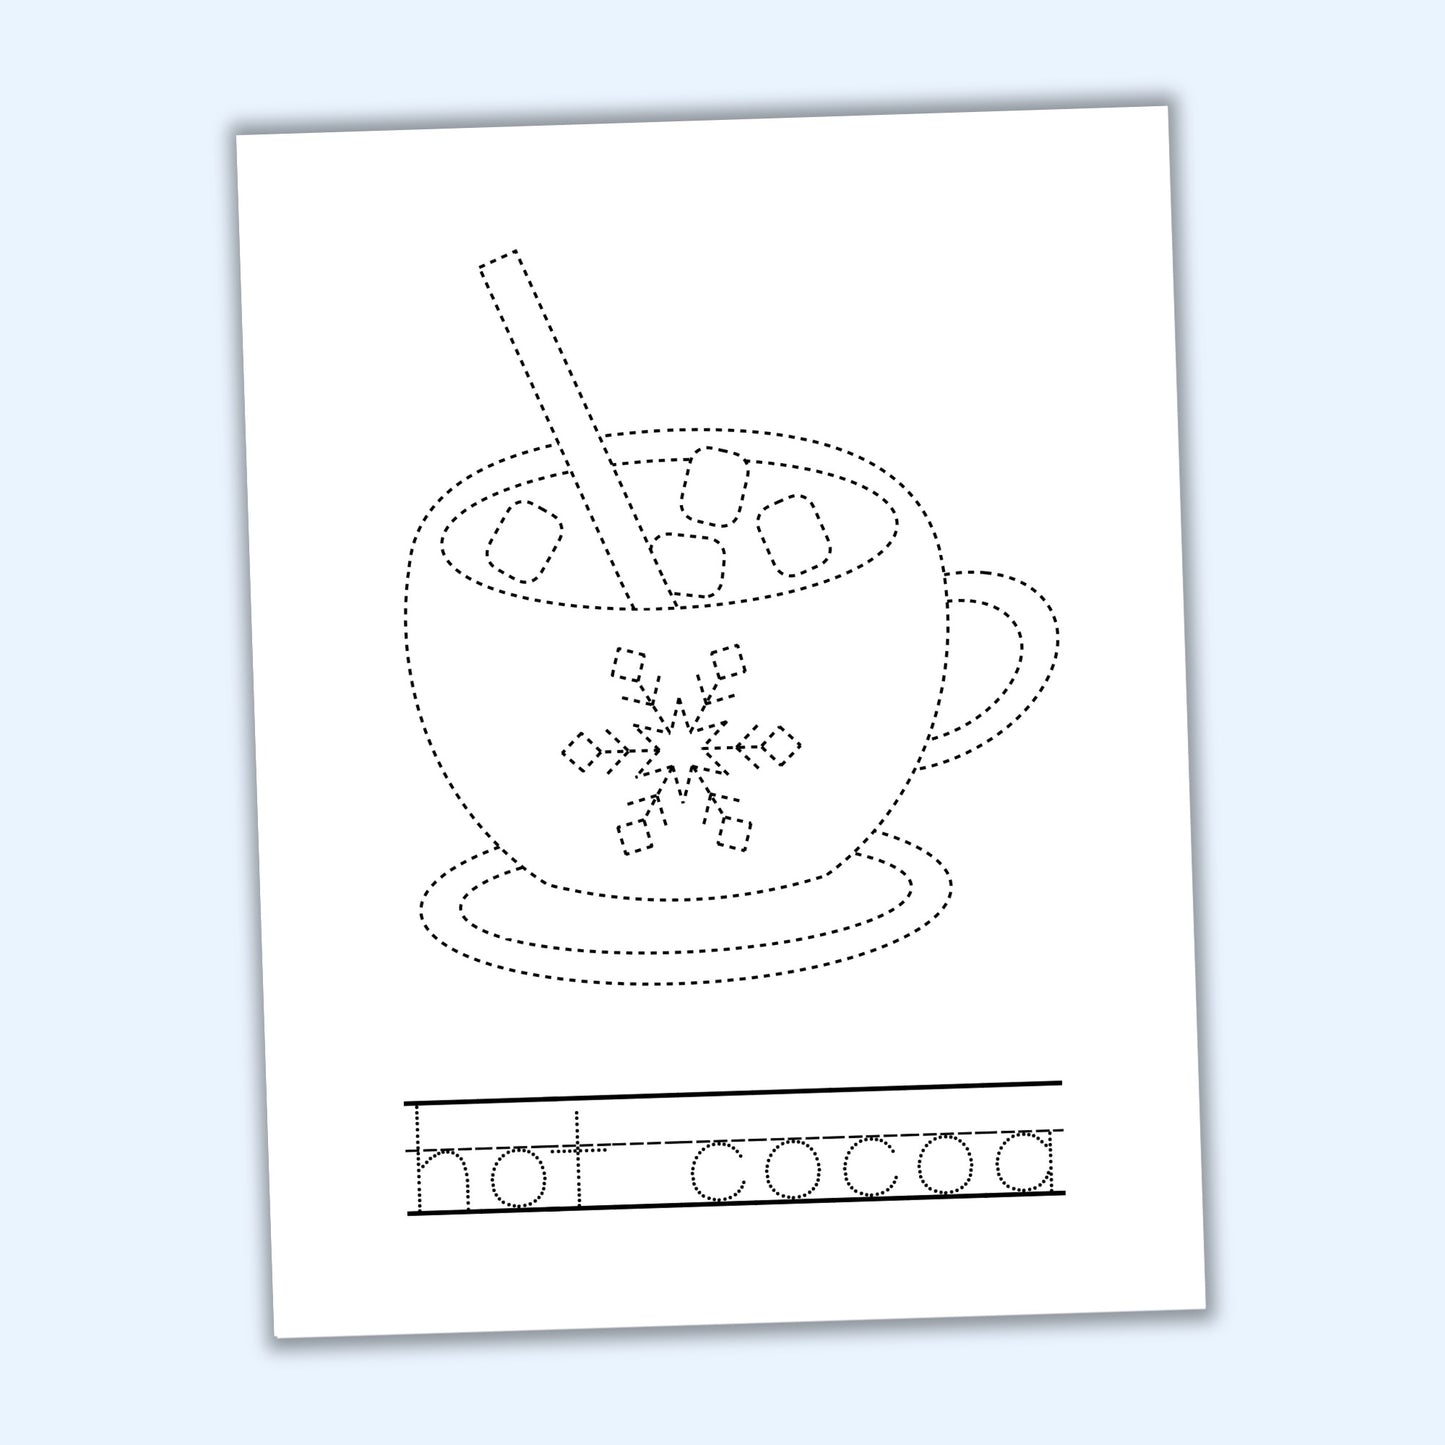 Winter Tracing Worksheets